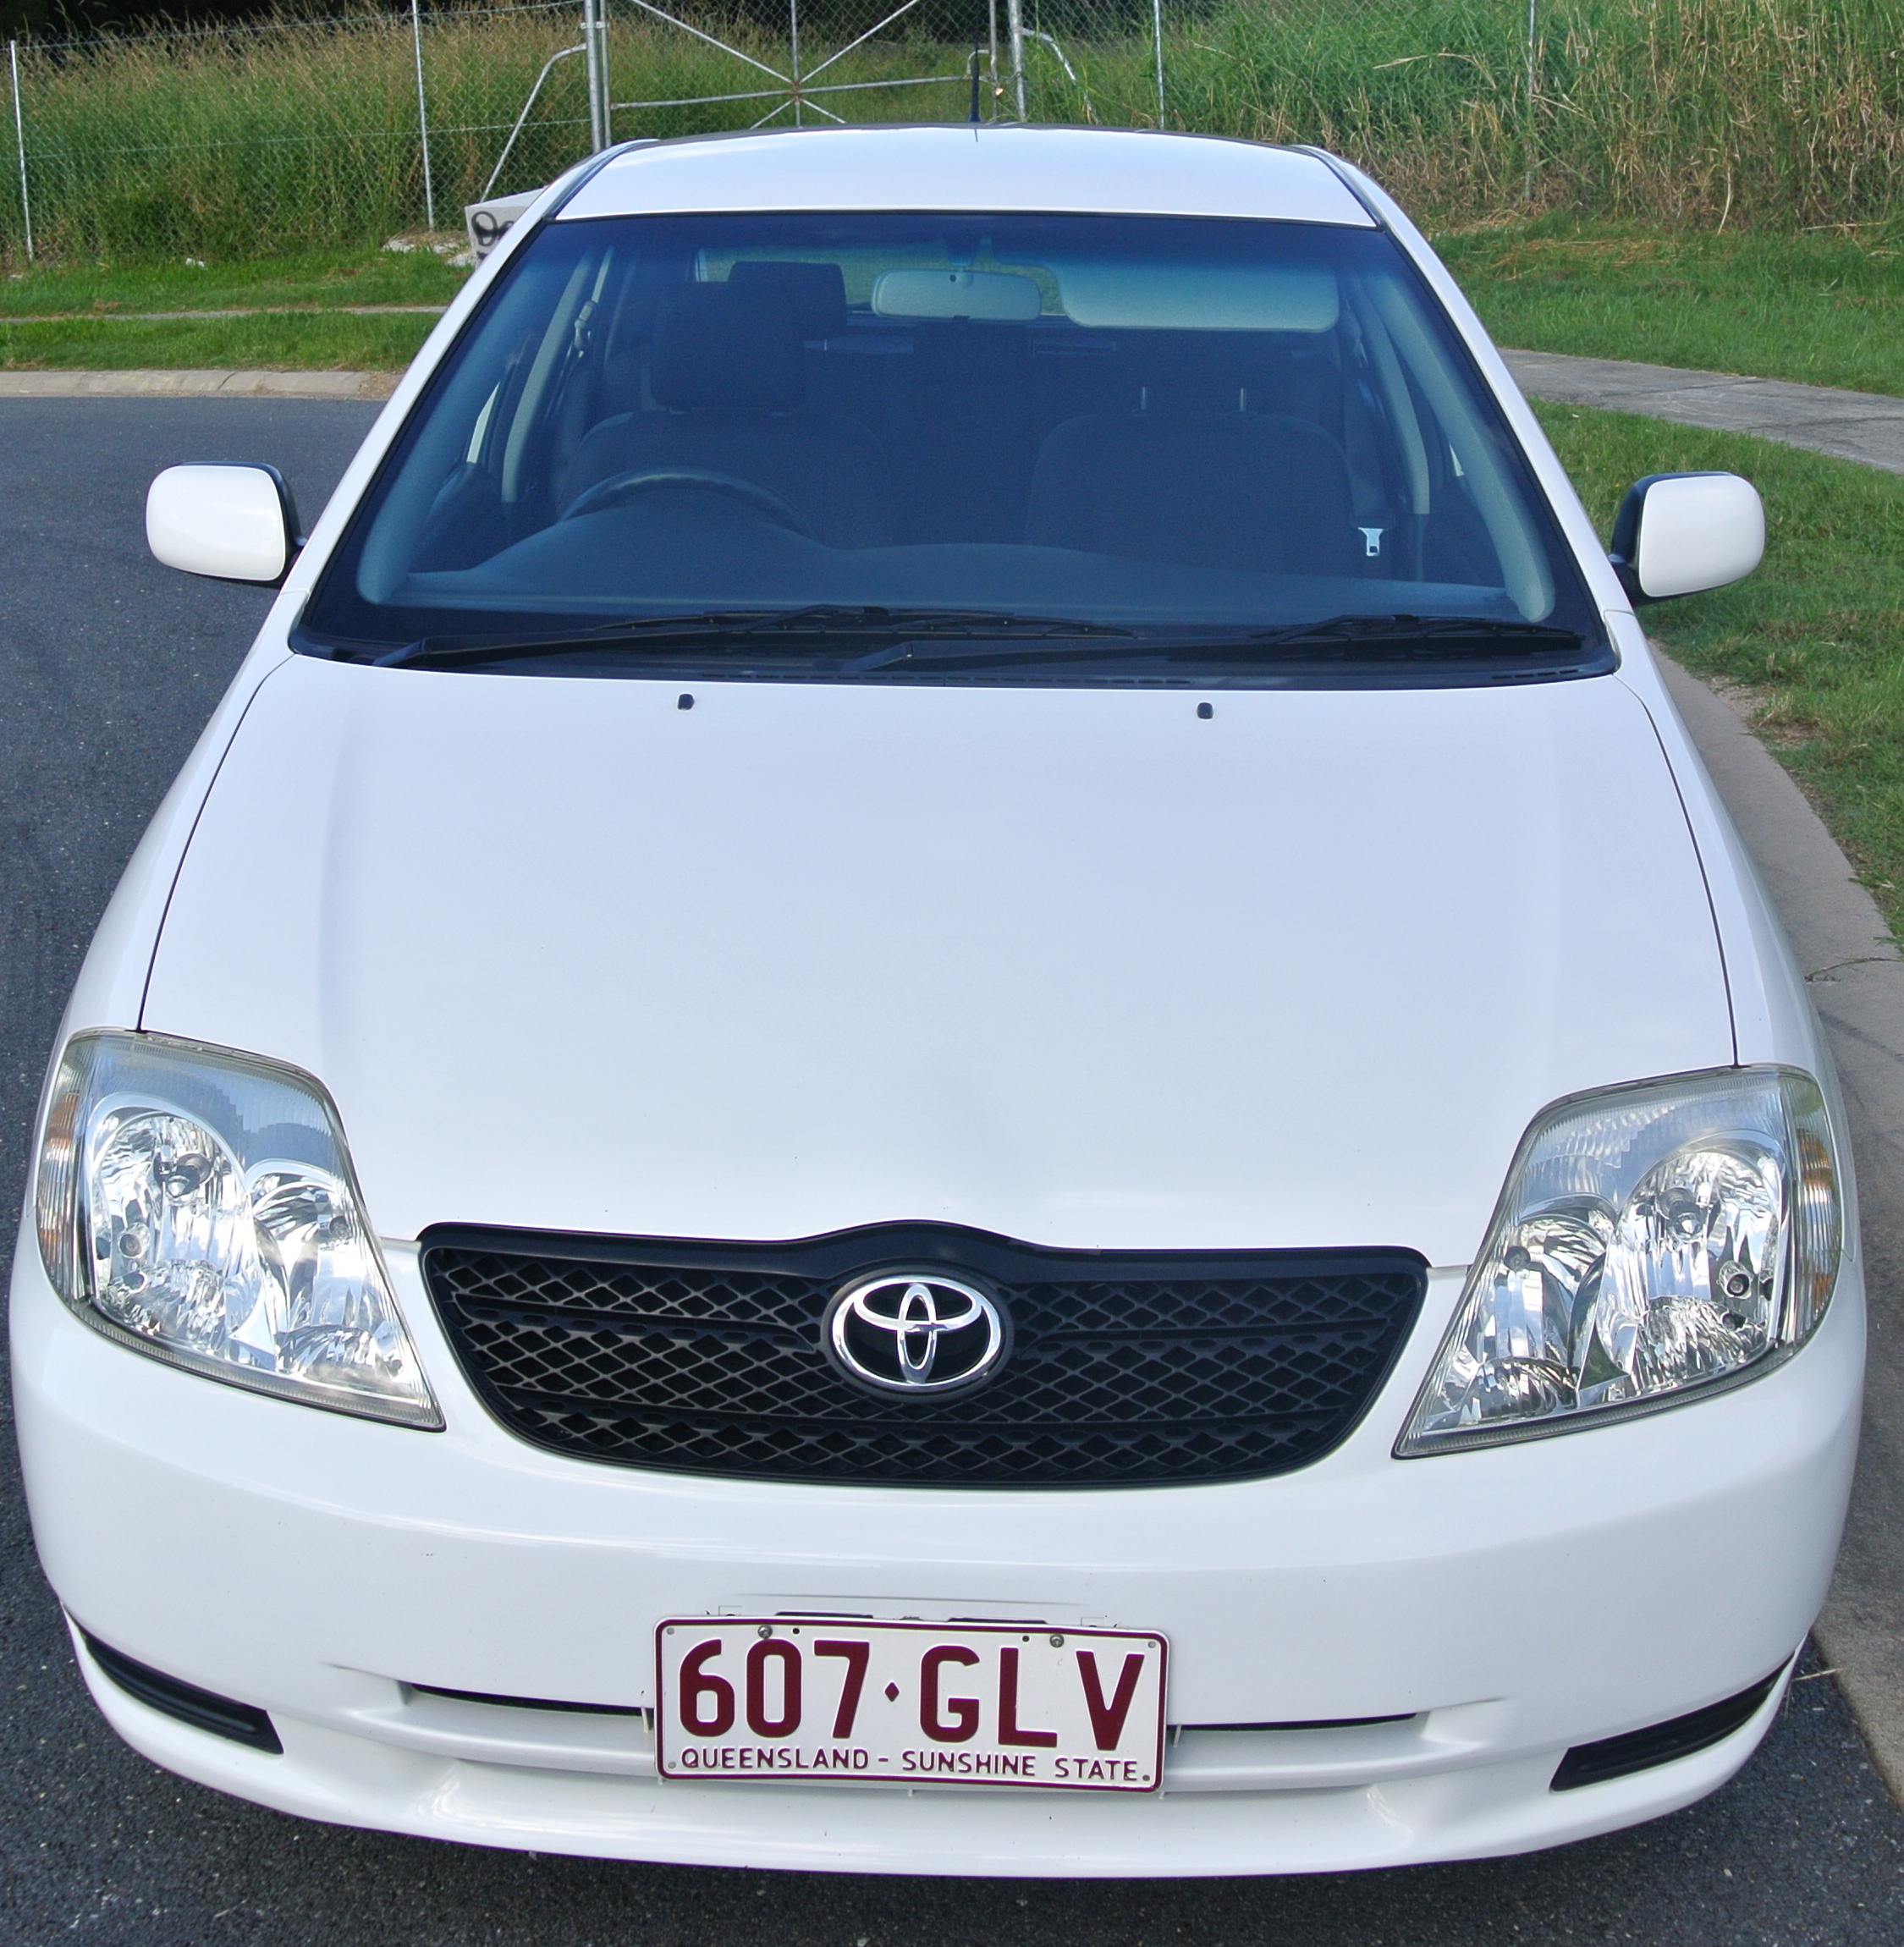 2002 toyota corolla ascent specifications #6